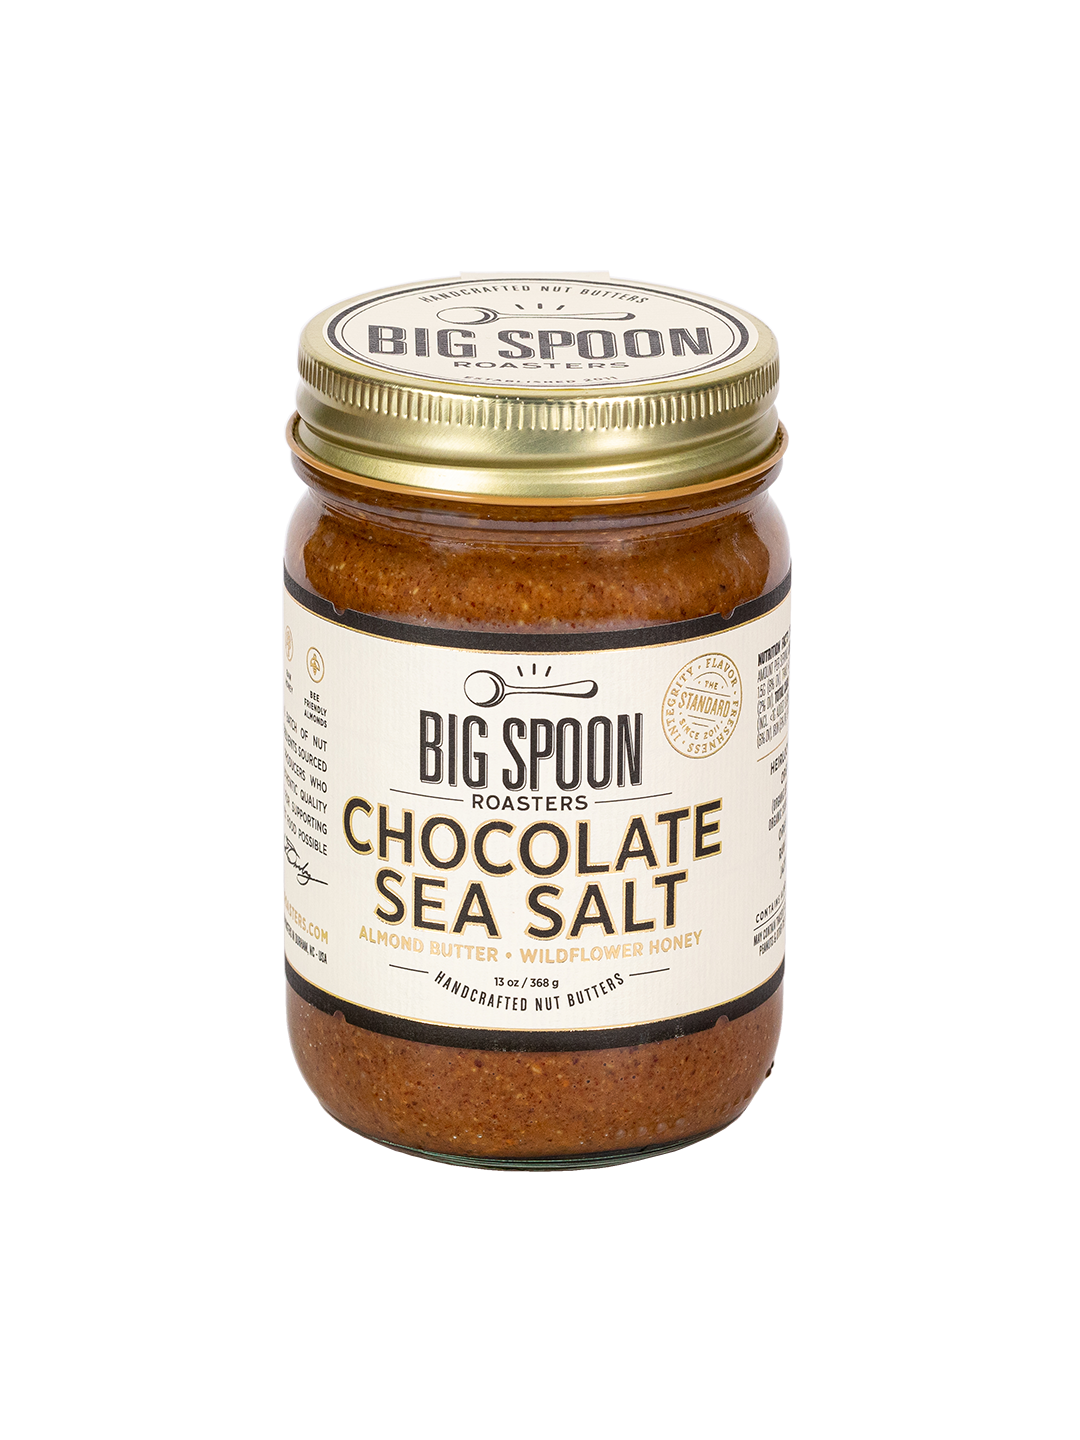 Big Spoon Chocolate Sea Salt Almond Butter  Big Spoon Roasters 13oz Jar  -better made easy-eco-friendly-sustainable-gifting